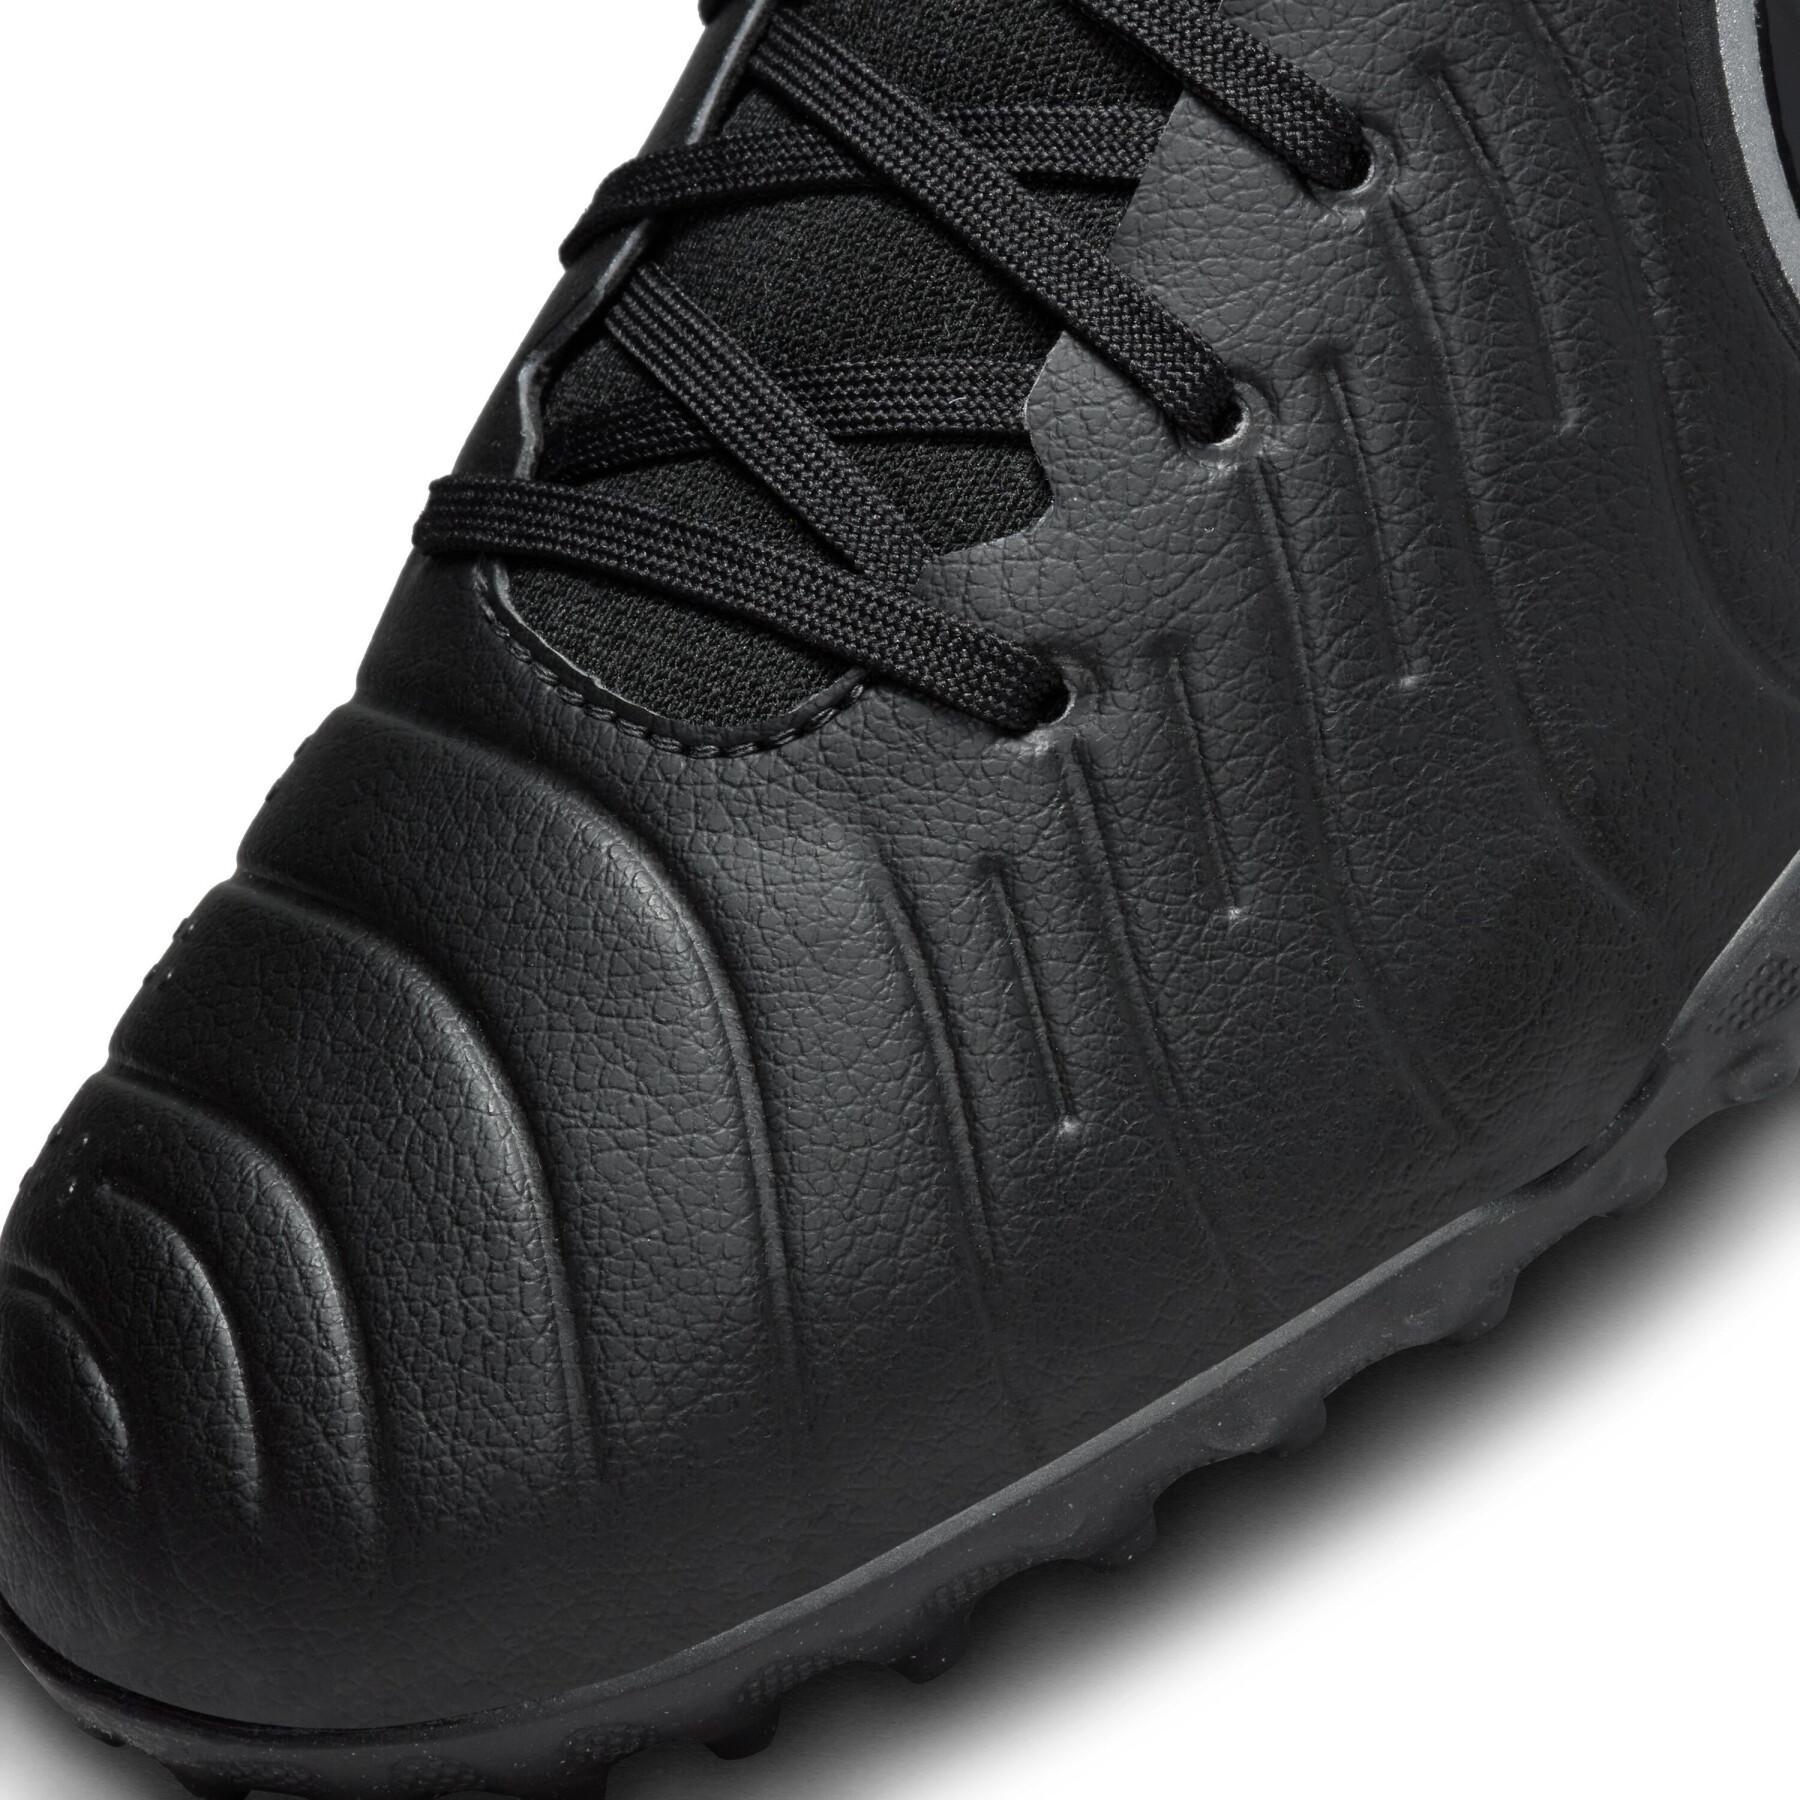 Chaussures de football Nike Tiempo Legend 10 Pro TF - Shadow Pack